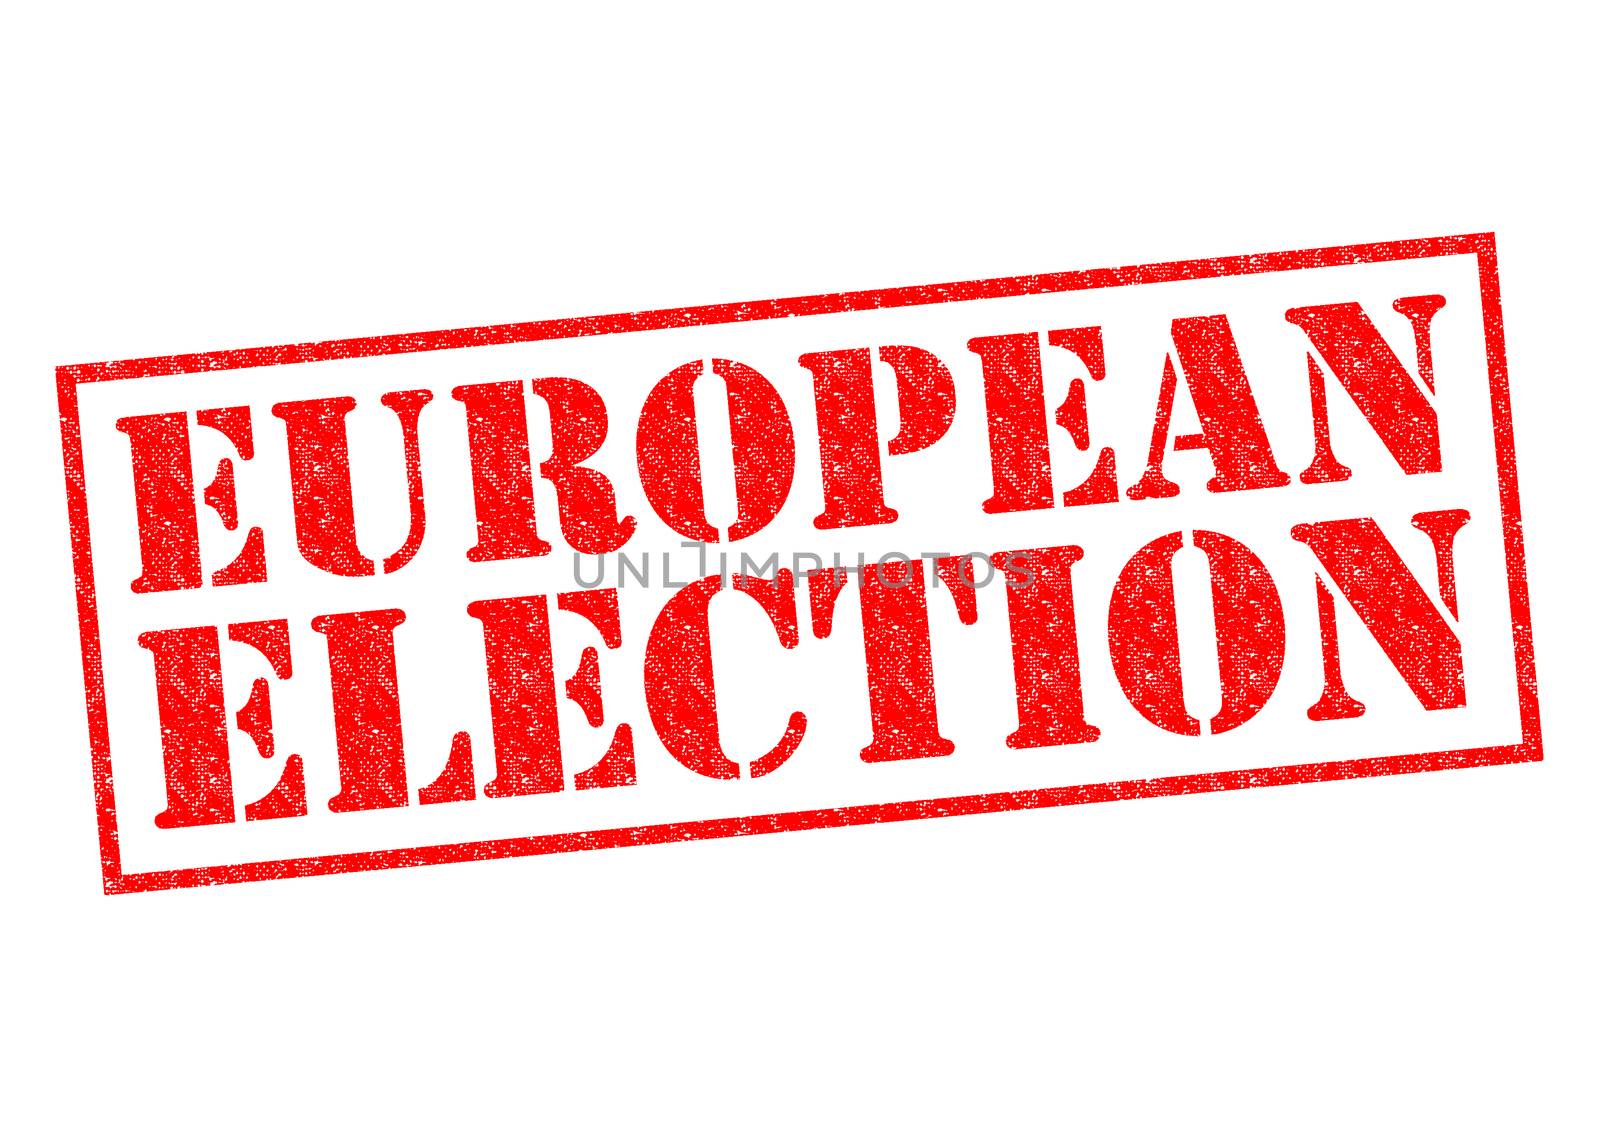 EUROPEAN ELECTION red Rubber Stamp over a white background.